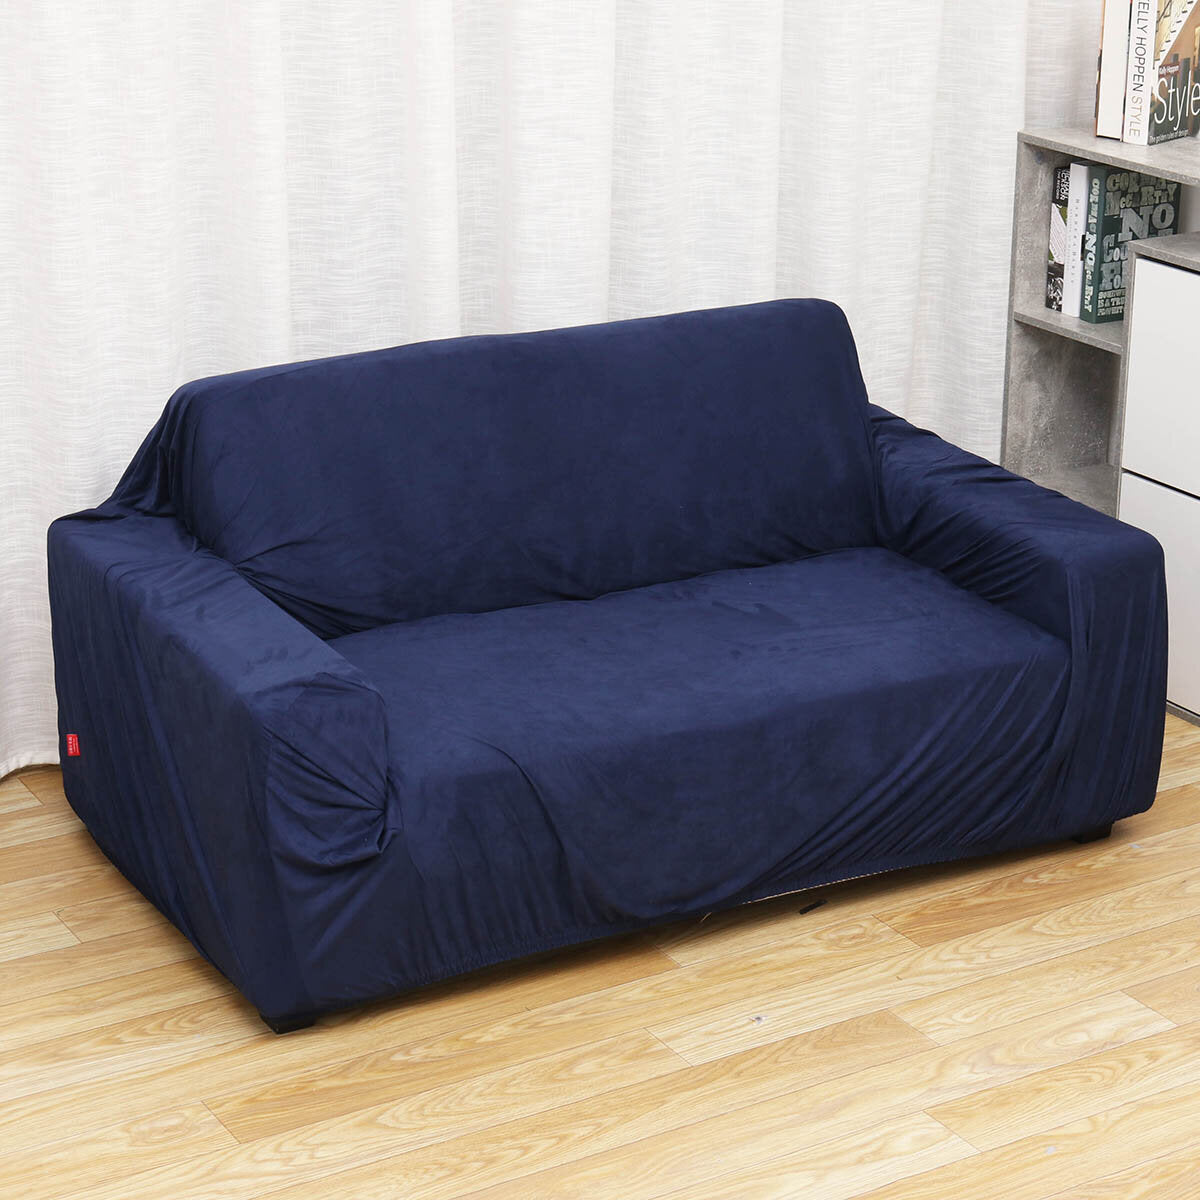 2 Seaters Elastic Velvet Sofa Cover Universal Chair Seat Protector Couch Case Stretch Slipcover Home Office Furniture Decoration